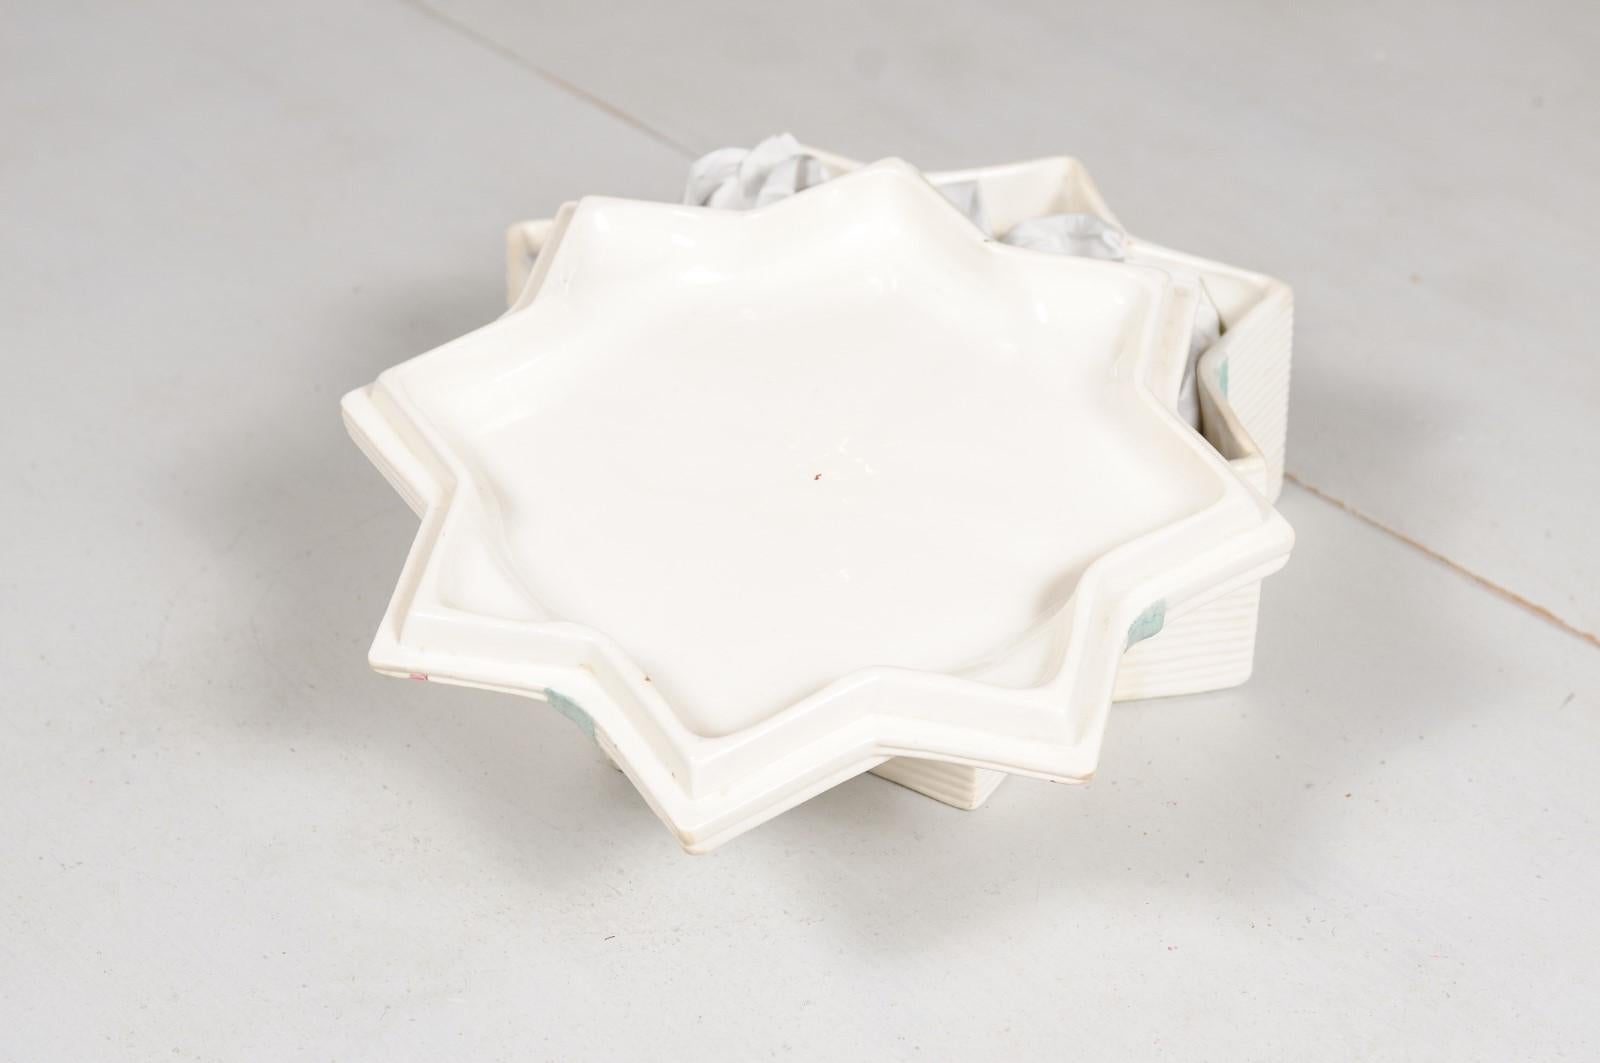 French 19th Century Sarreguemines Star-Shaped Porcelain Box with Floral Motifs For Sale 4